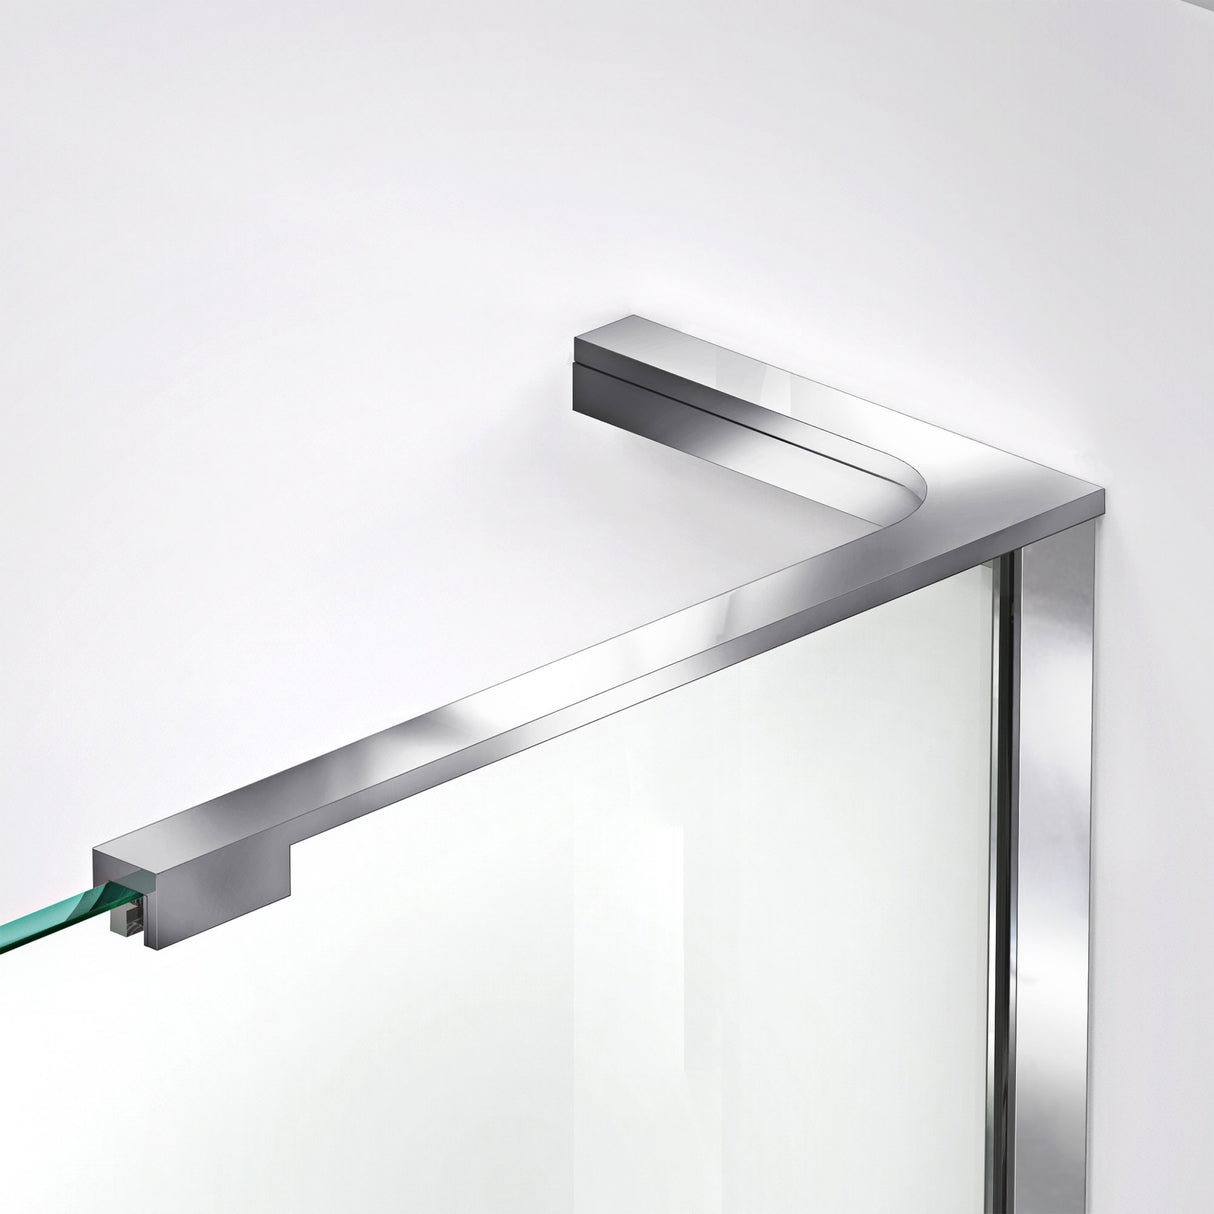 DreamLine Unidoor-X 64 1/2 in. W x 30 3/8 in. D x 72 in. H Frameless Hinged Shower Enclosure in Chrome